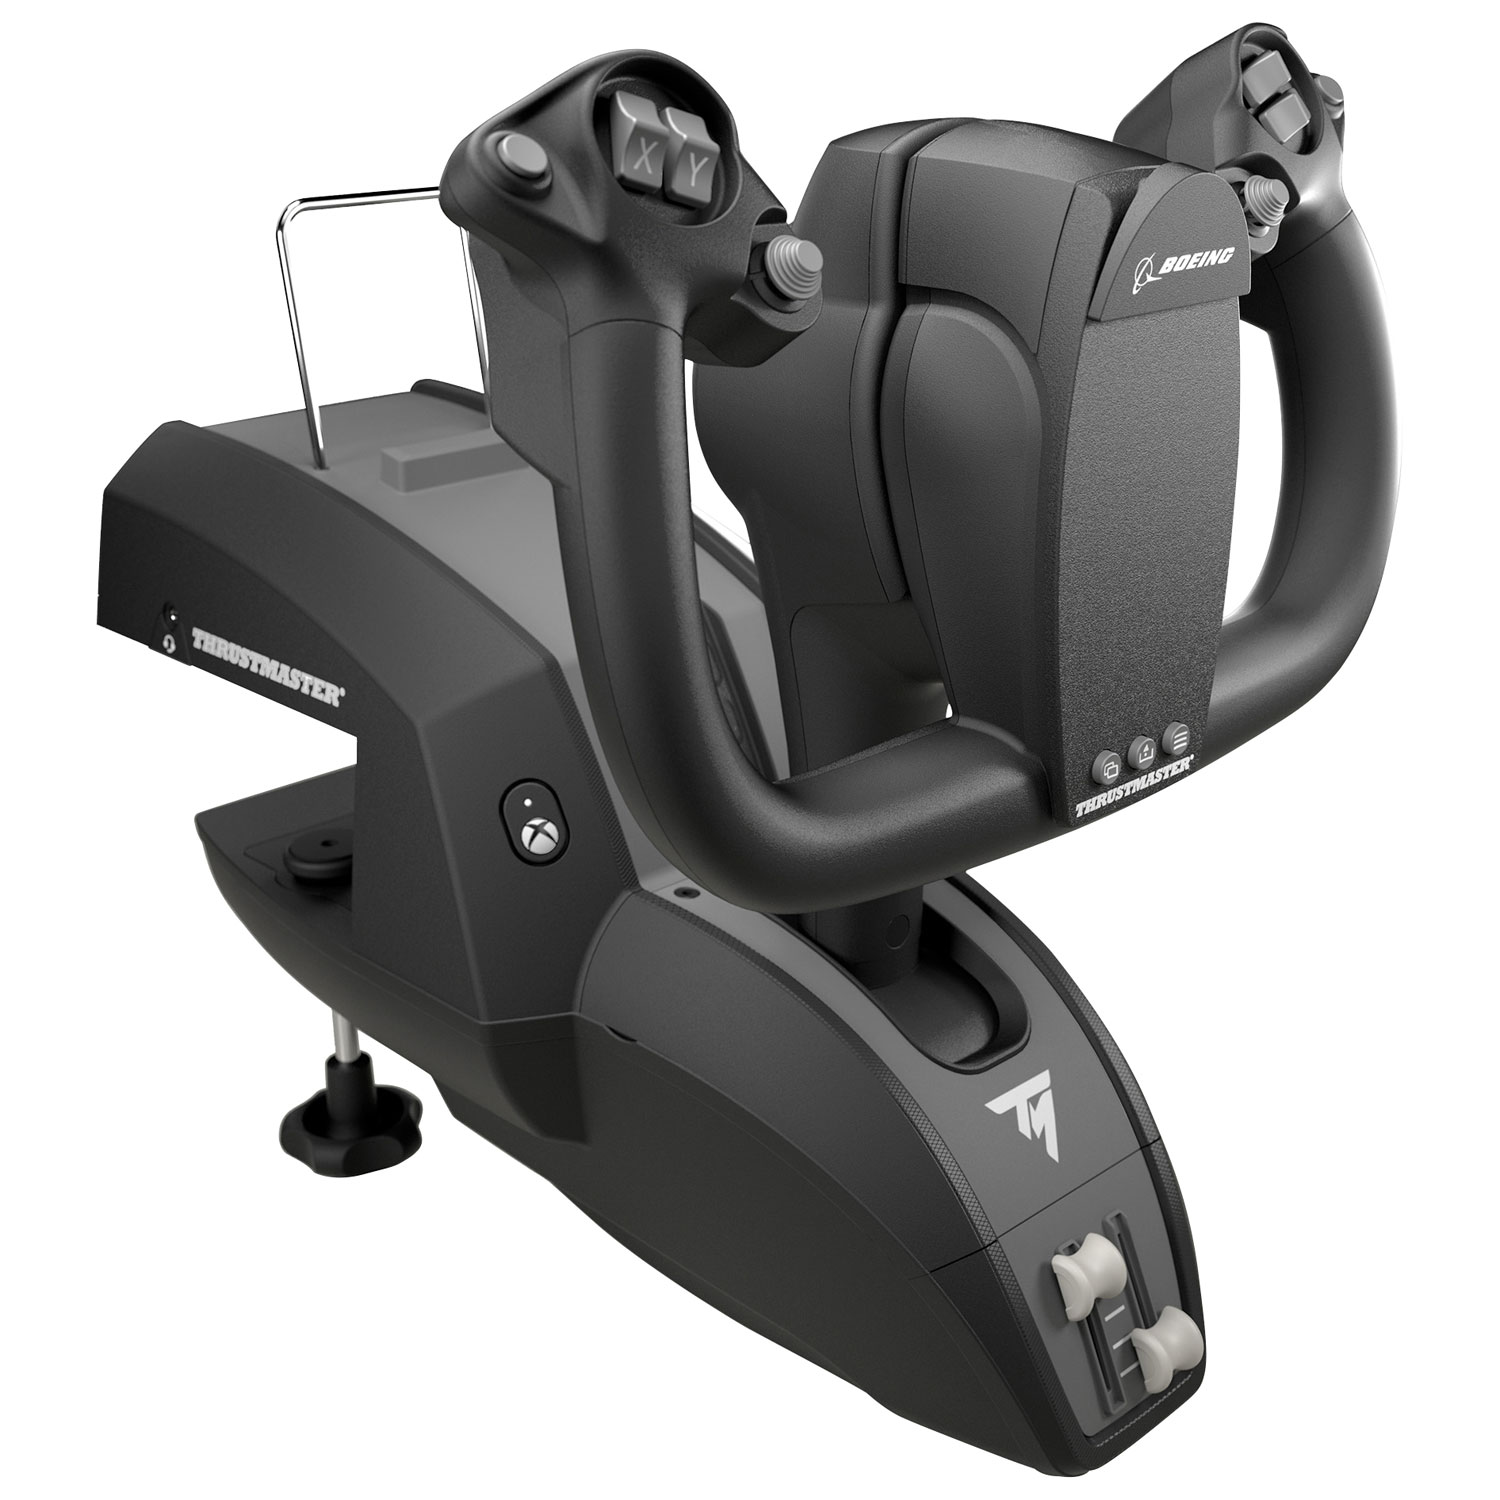 Thrustmaster TCA Yoke Joystick Boeing Edition for Xbox One and Xbox Series X|S/ PC